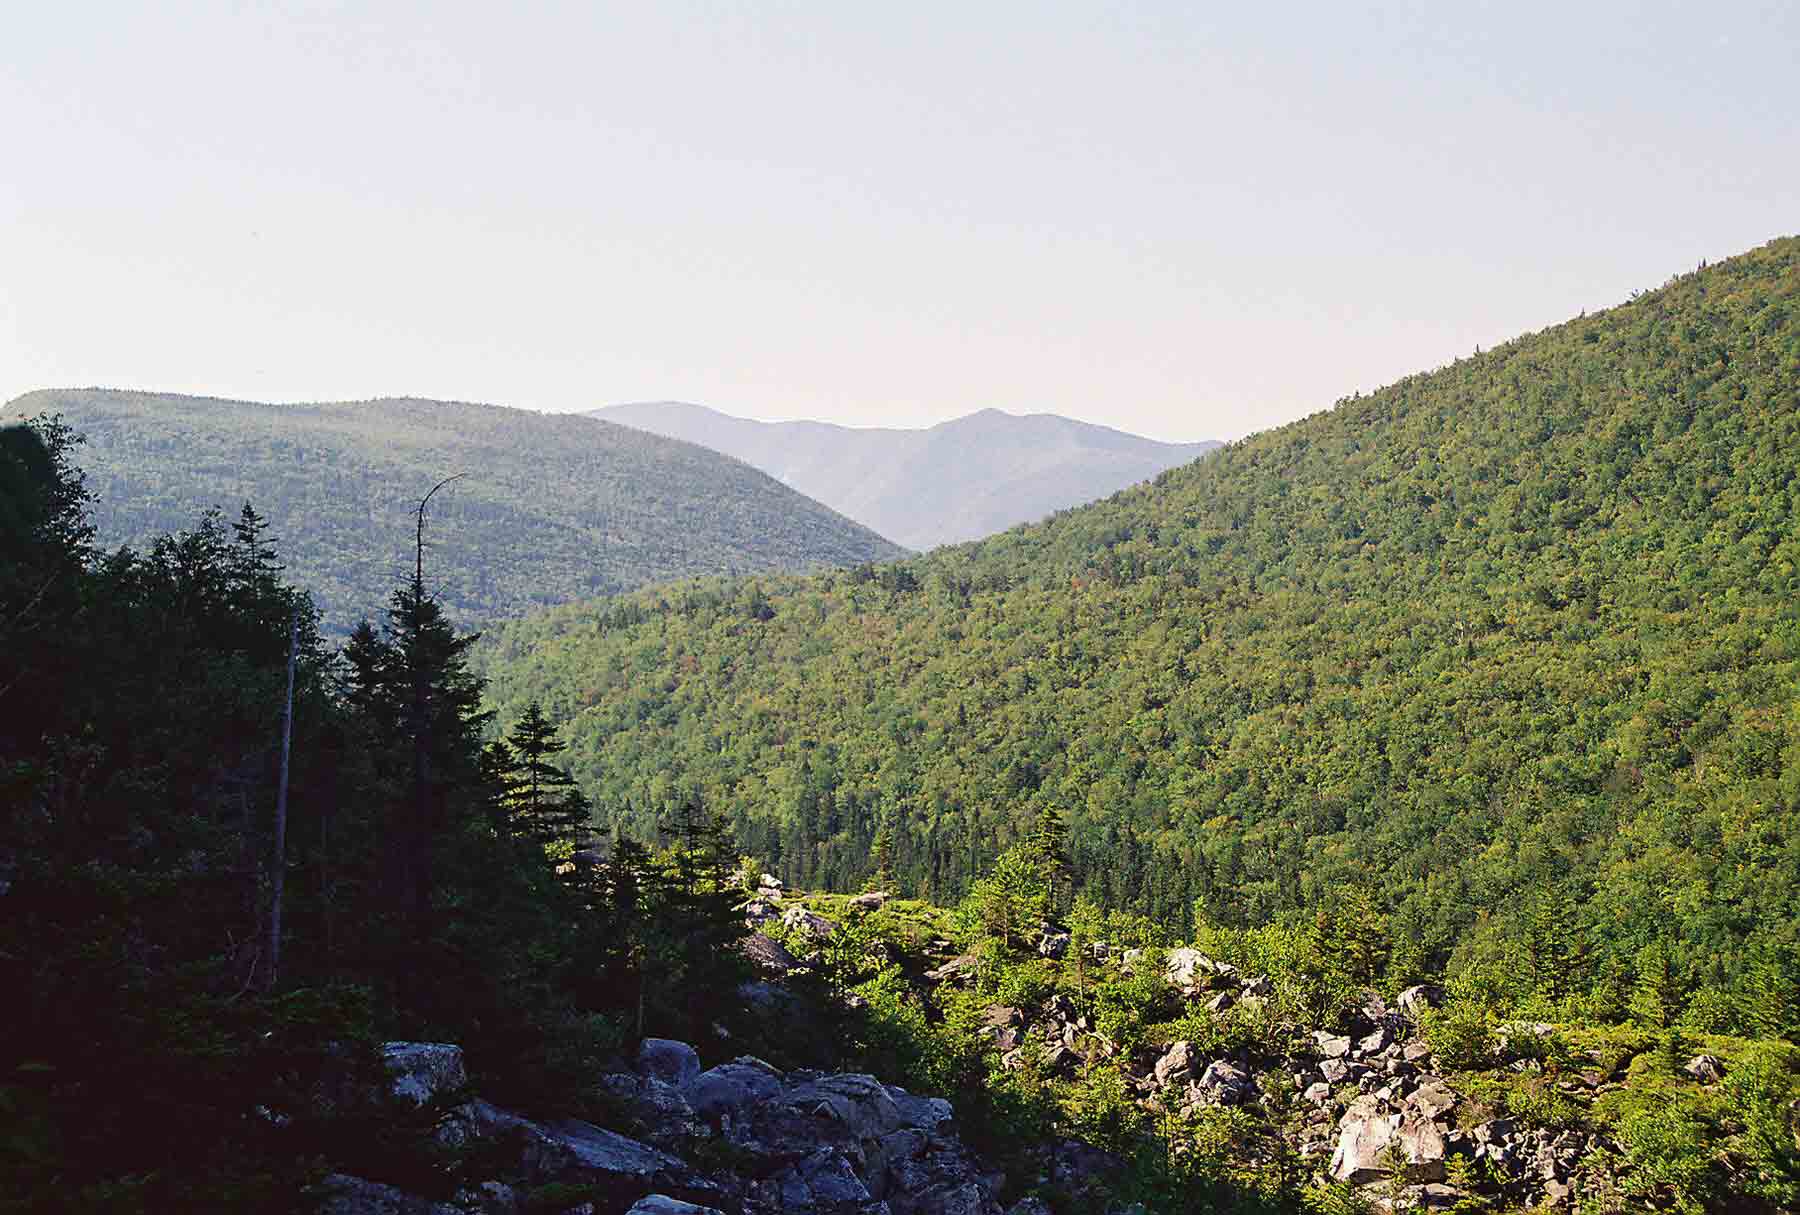 mm 6.2 - View south through Zealand Notch from junction of AT (Ethan Pond Trail) and the Zeacliff Trail. Courtesy dlcul@conncoll.edu